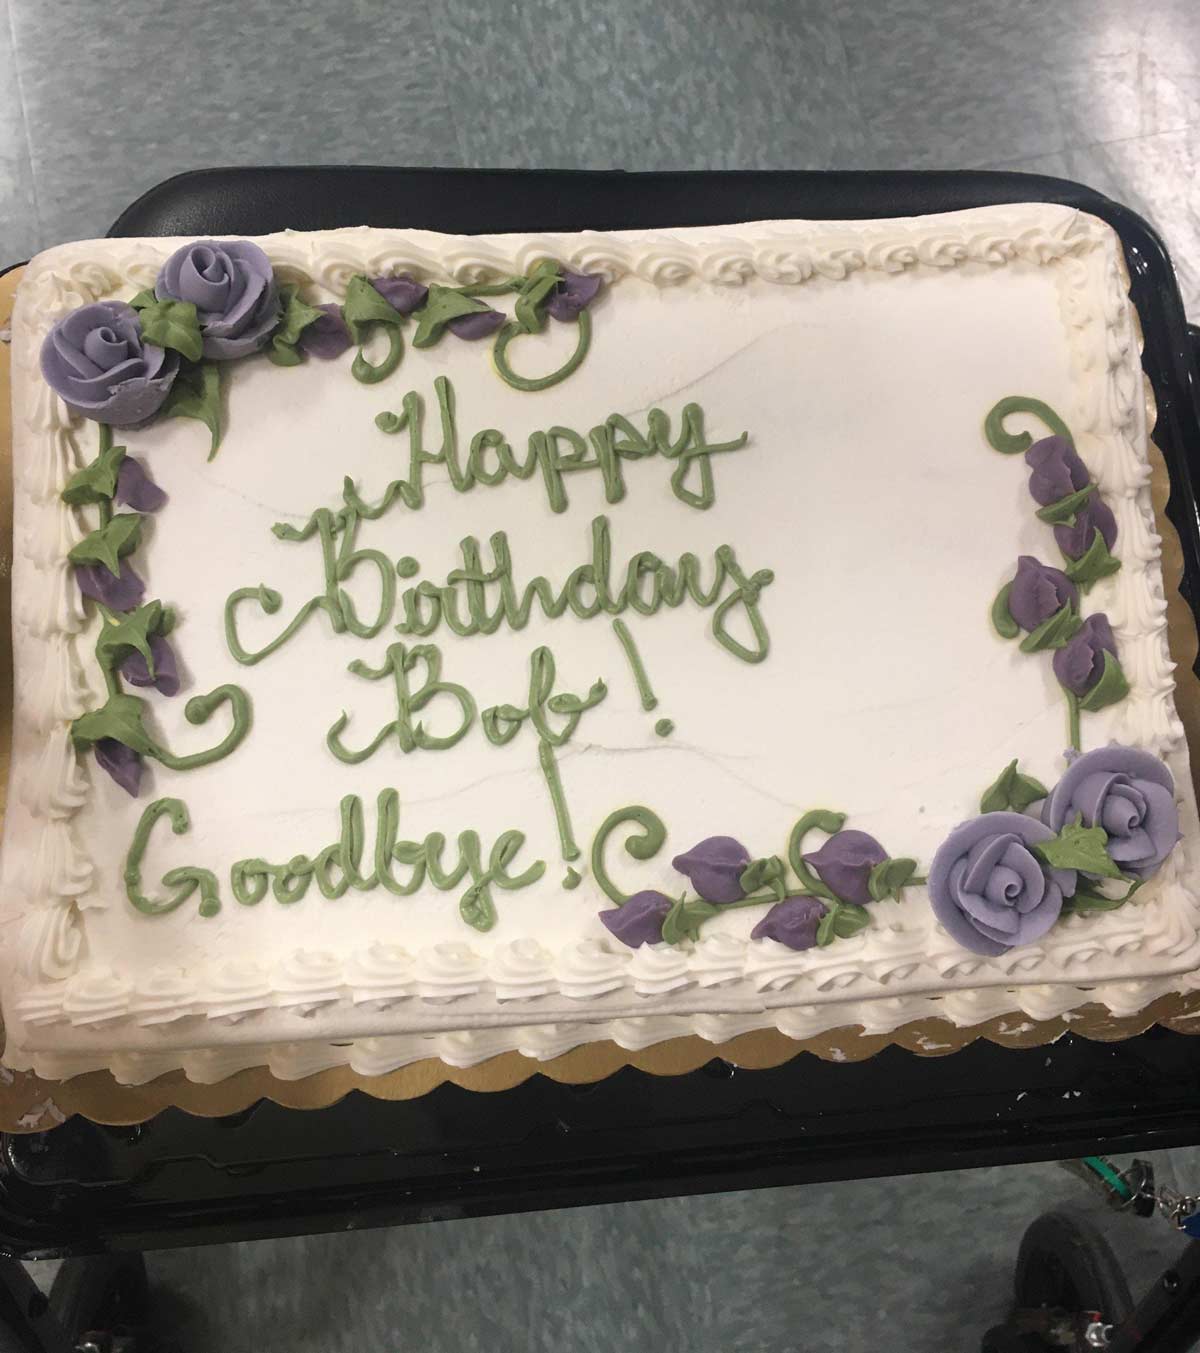 My husband's last day of work at the senior center was 3 days before his birthday